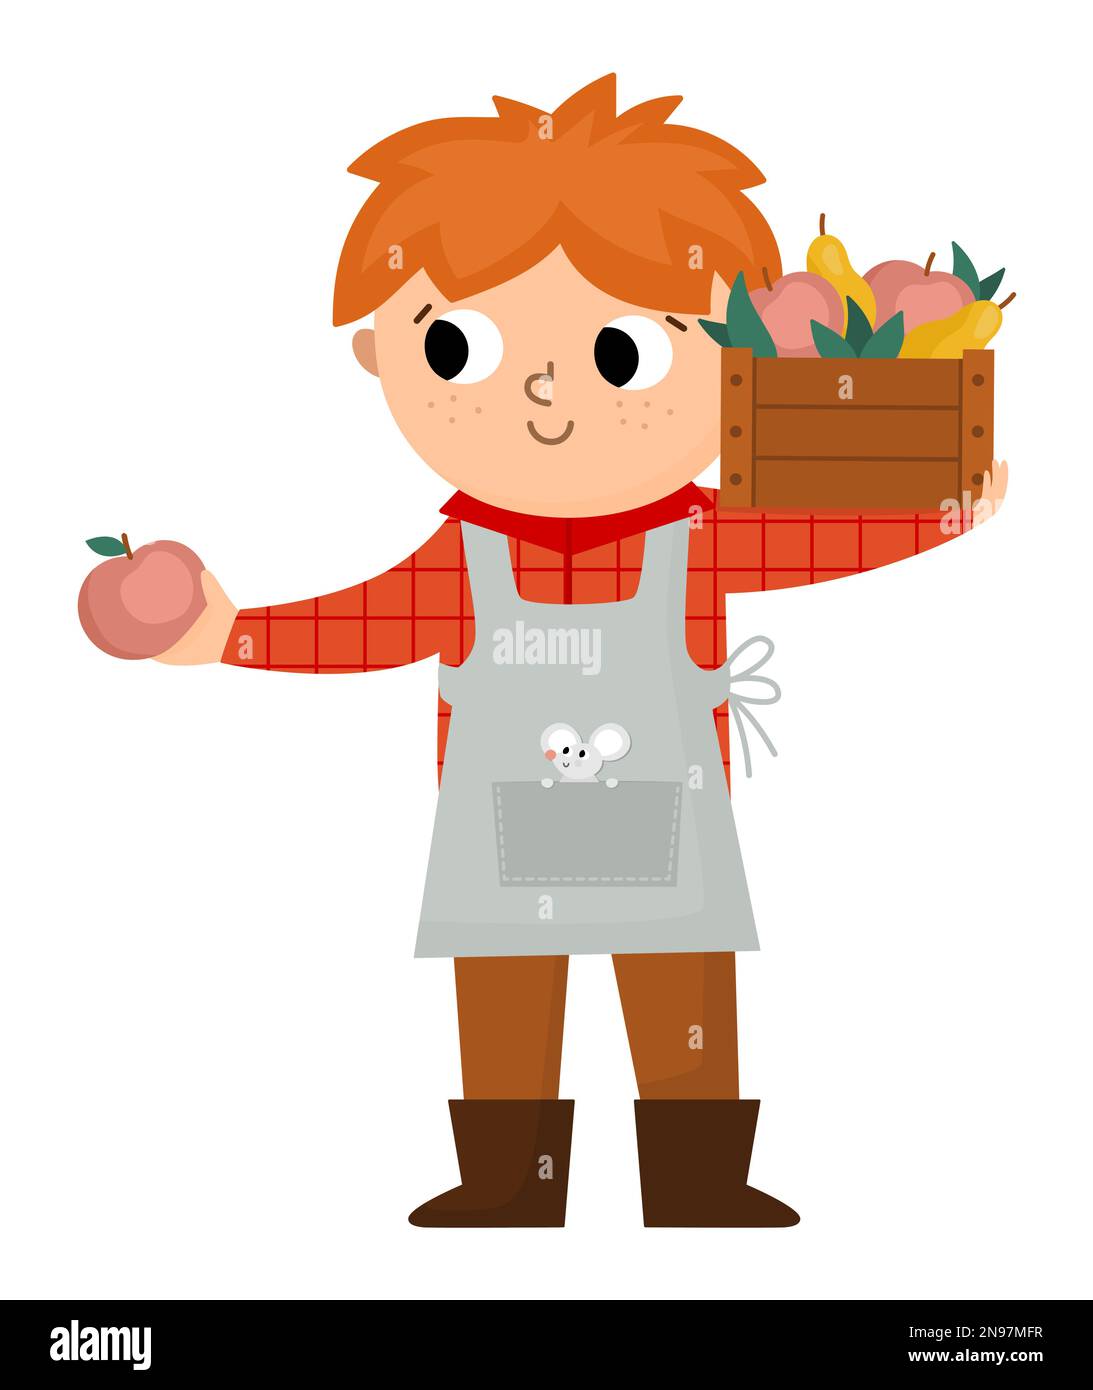 Vector farmer standing with harvest in the wooden box. Cute kid doing agricultural work icon. Rural country character. Child vendor in apron with appl Stock Vector